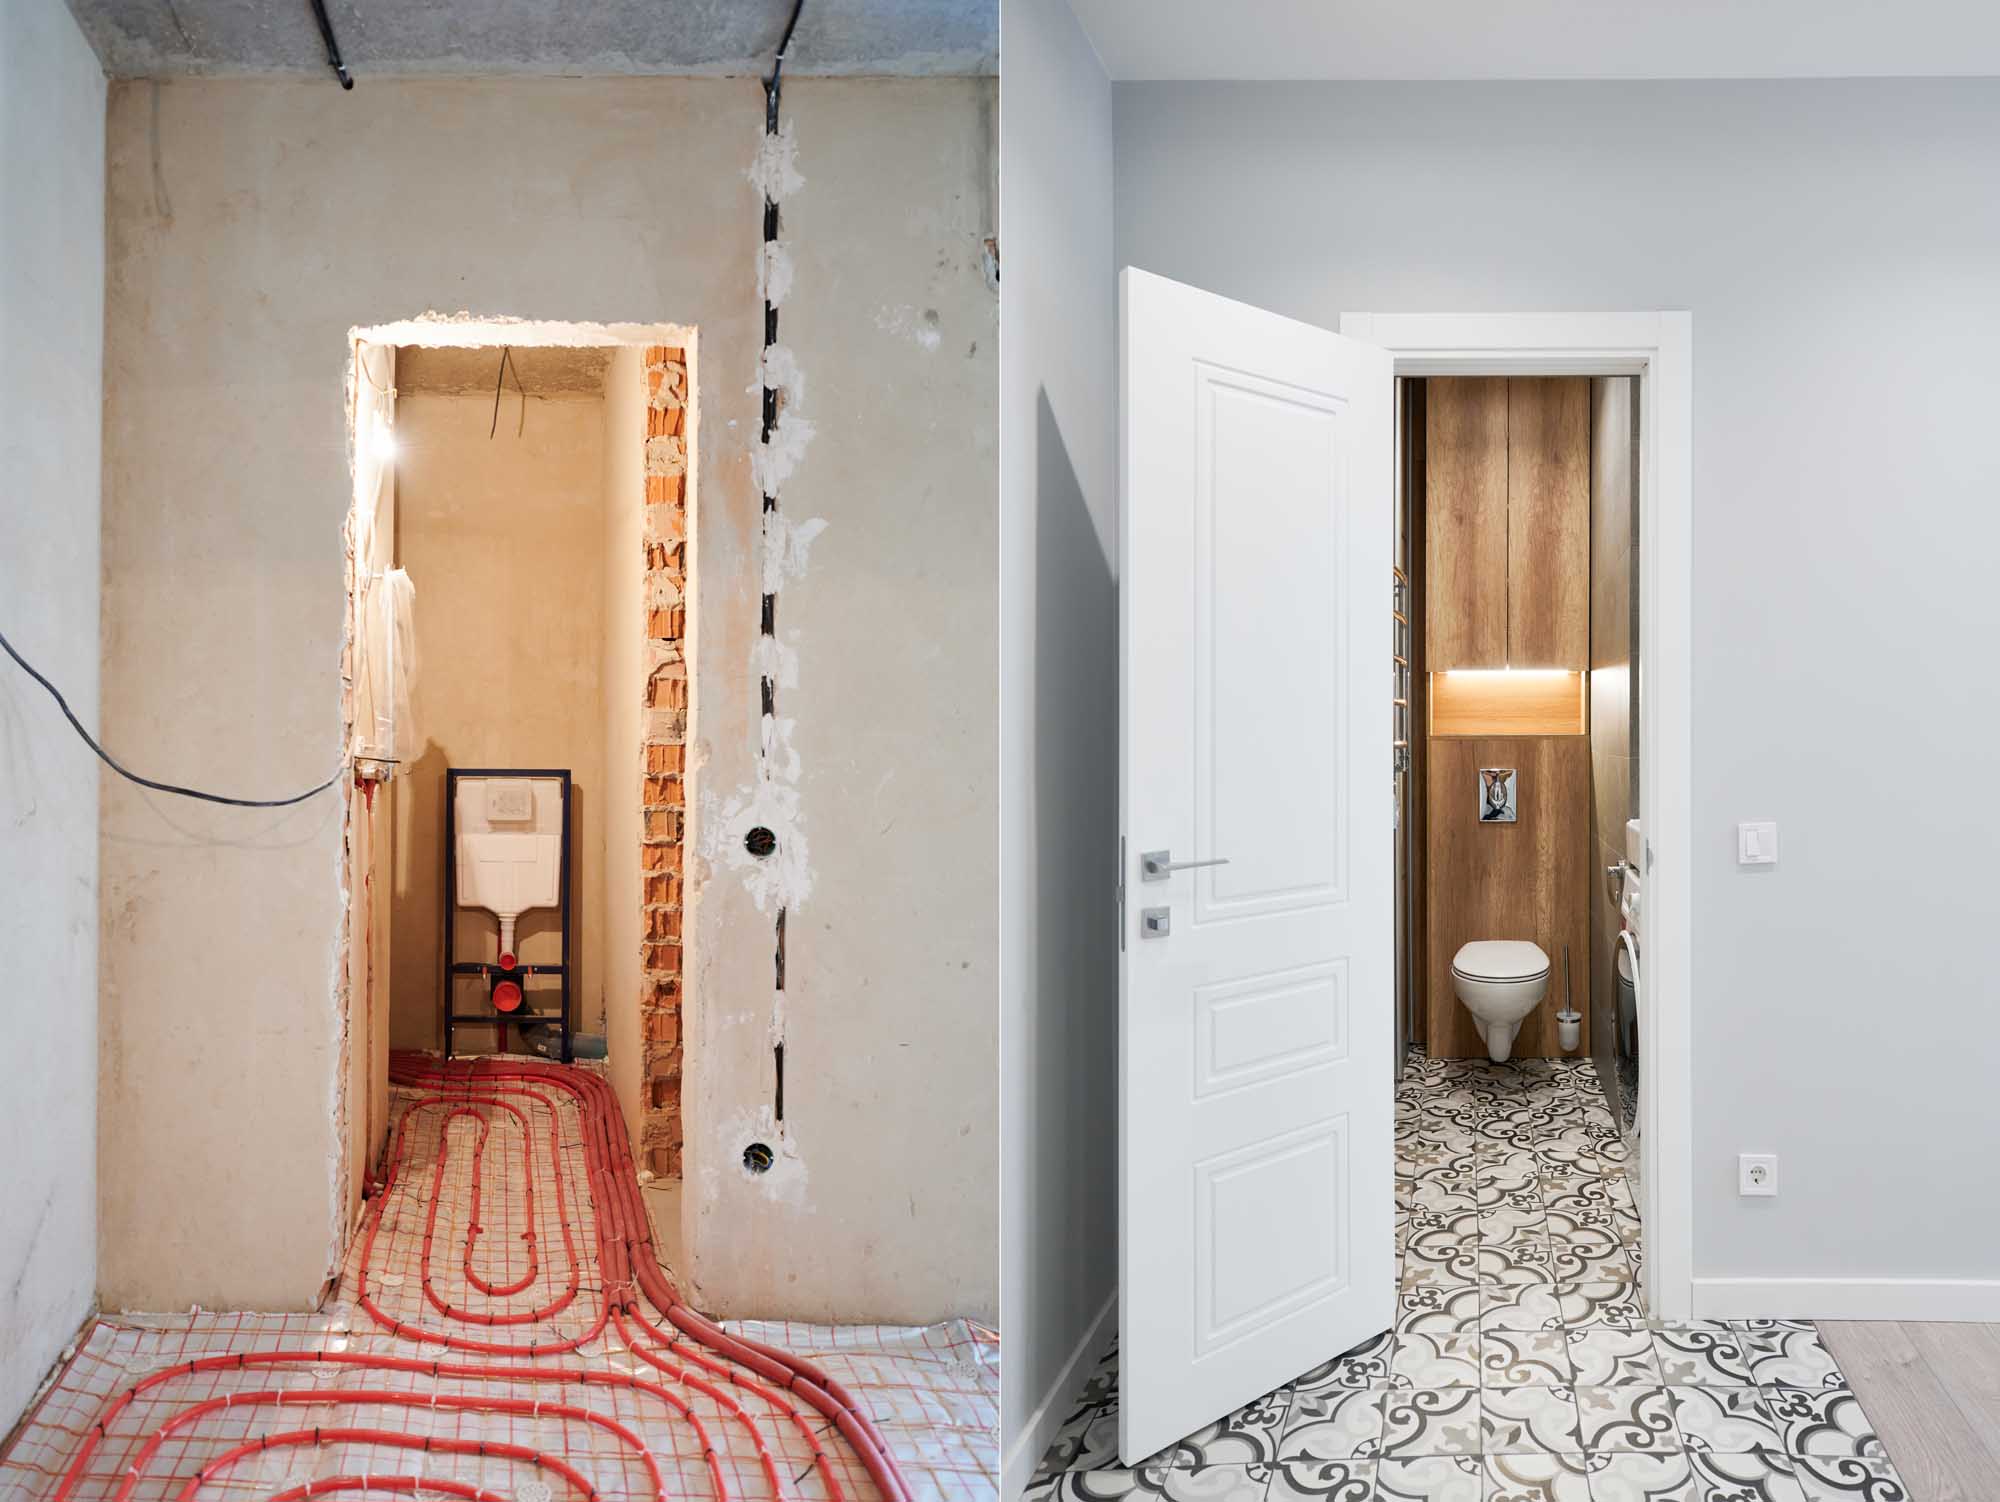 Comparison of bathroom with wall-hung toilet and heated floor before and after refurbishment. Old apartment restroom with underfloor heating pipes and new renovated flat with modern toilet.